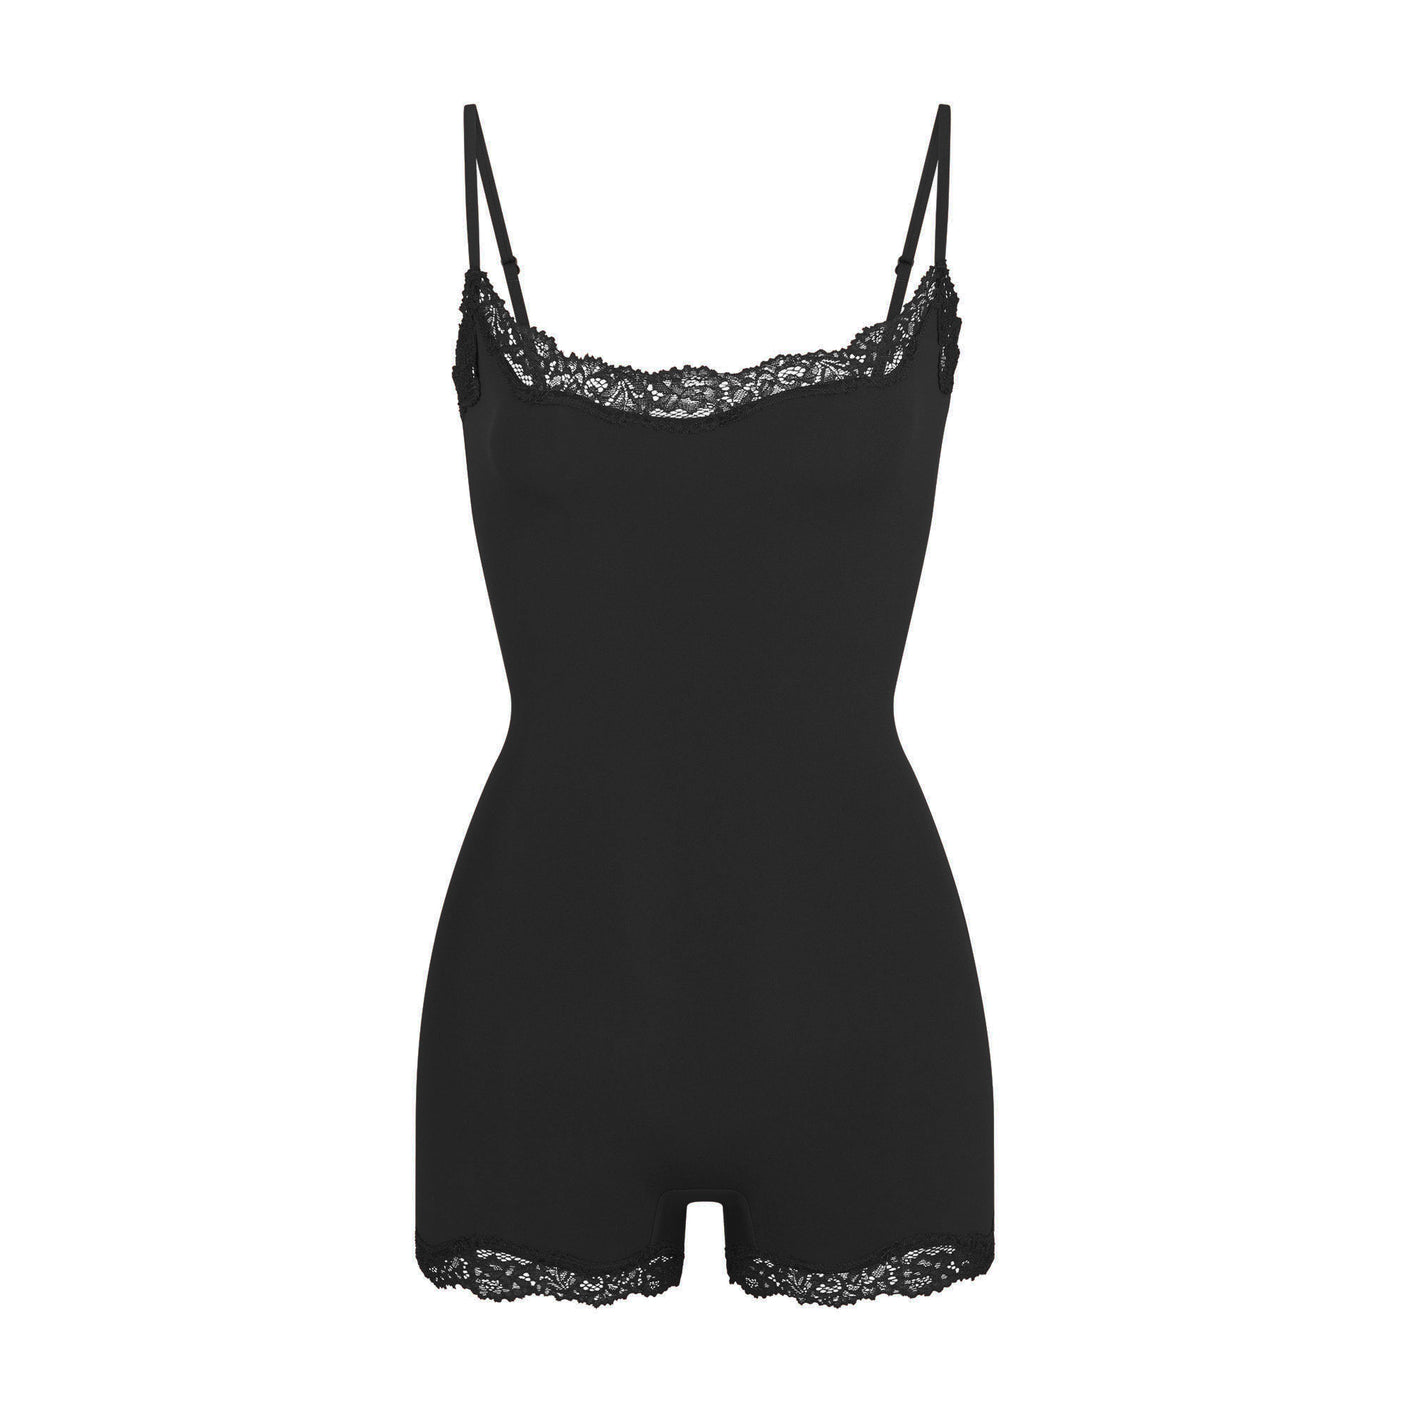 FITS FITS EVERYBODY LACE CAMI BODYSUIT, ONYX - FITS EVERYBODY LACE CAMI  BODYSUIT, ONYX